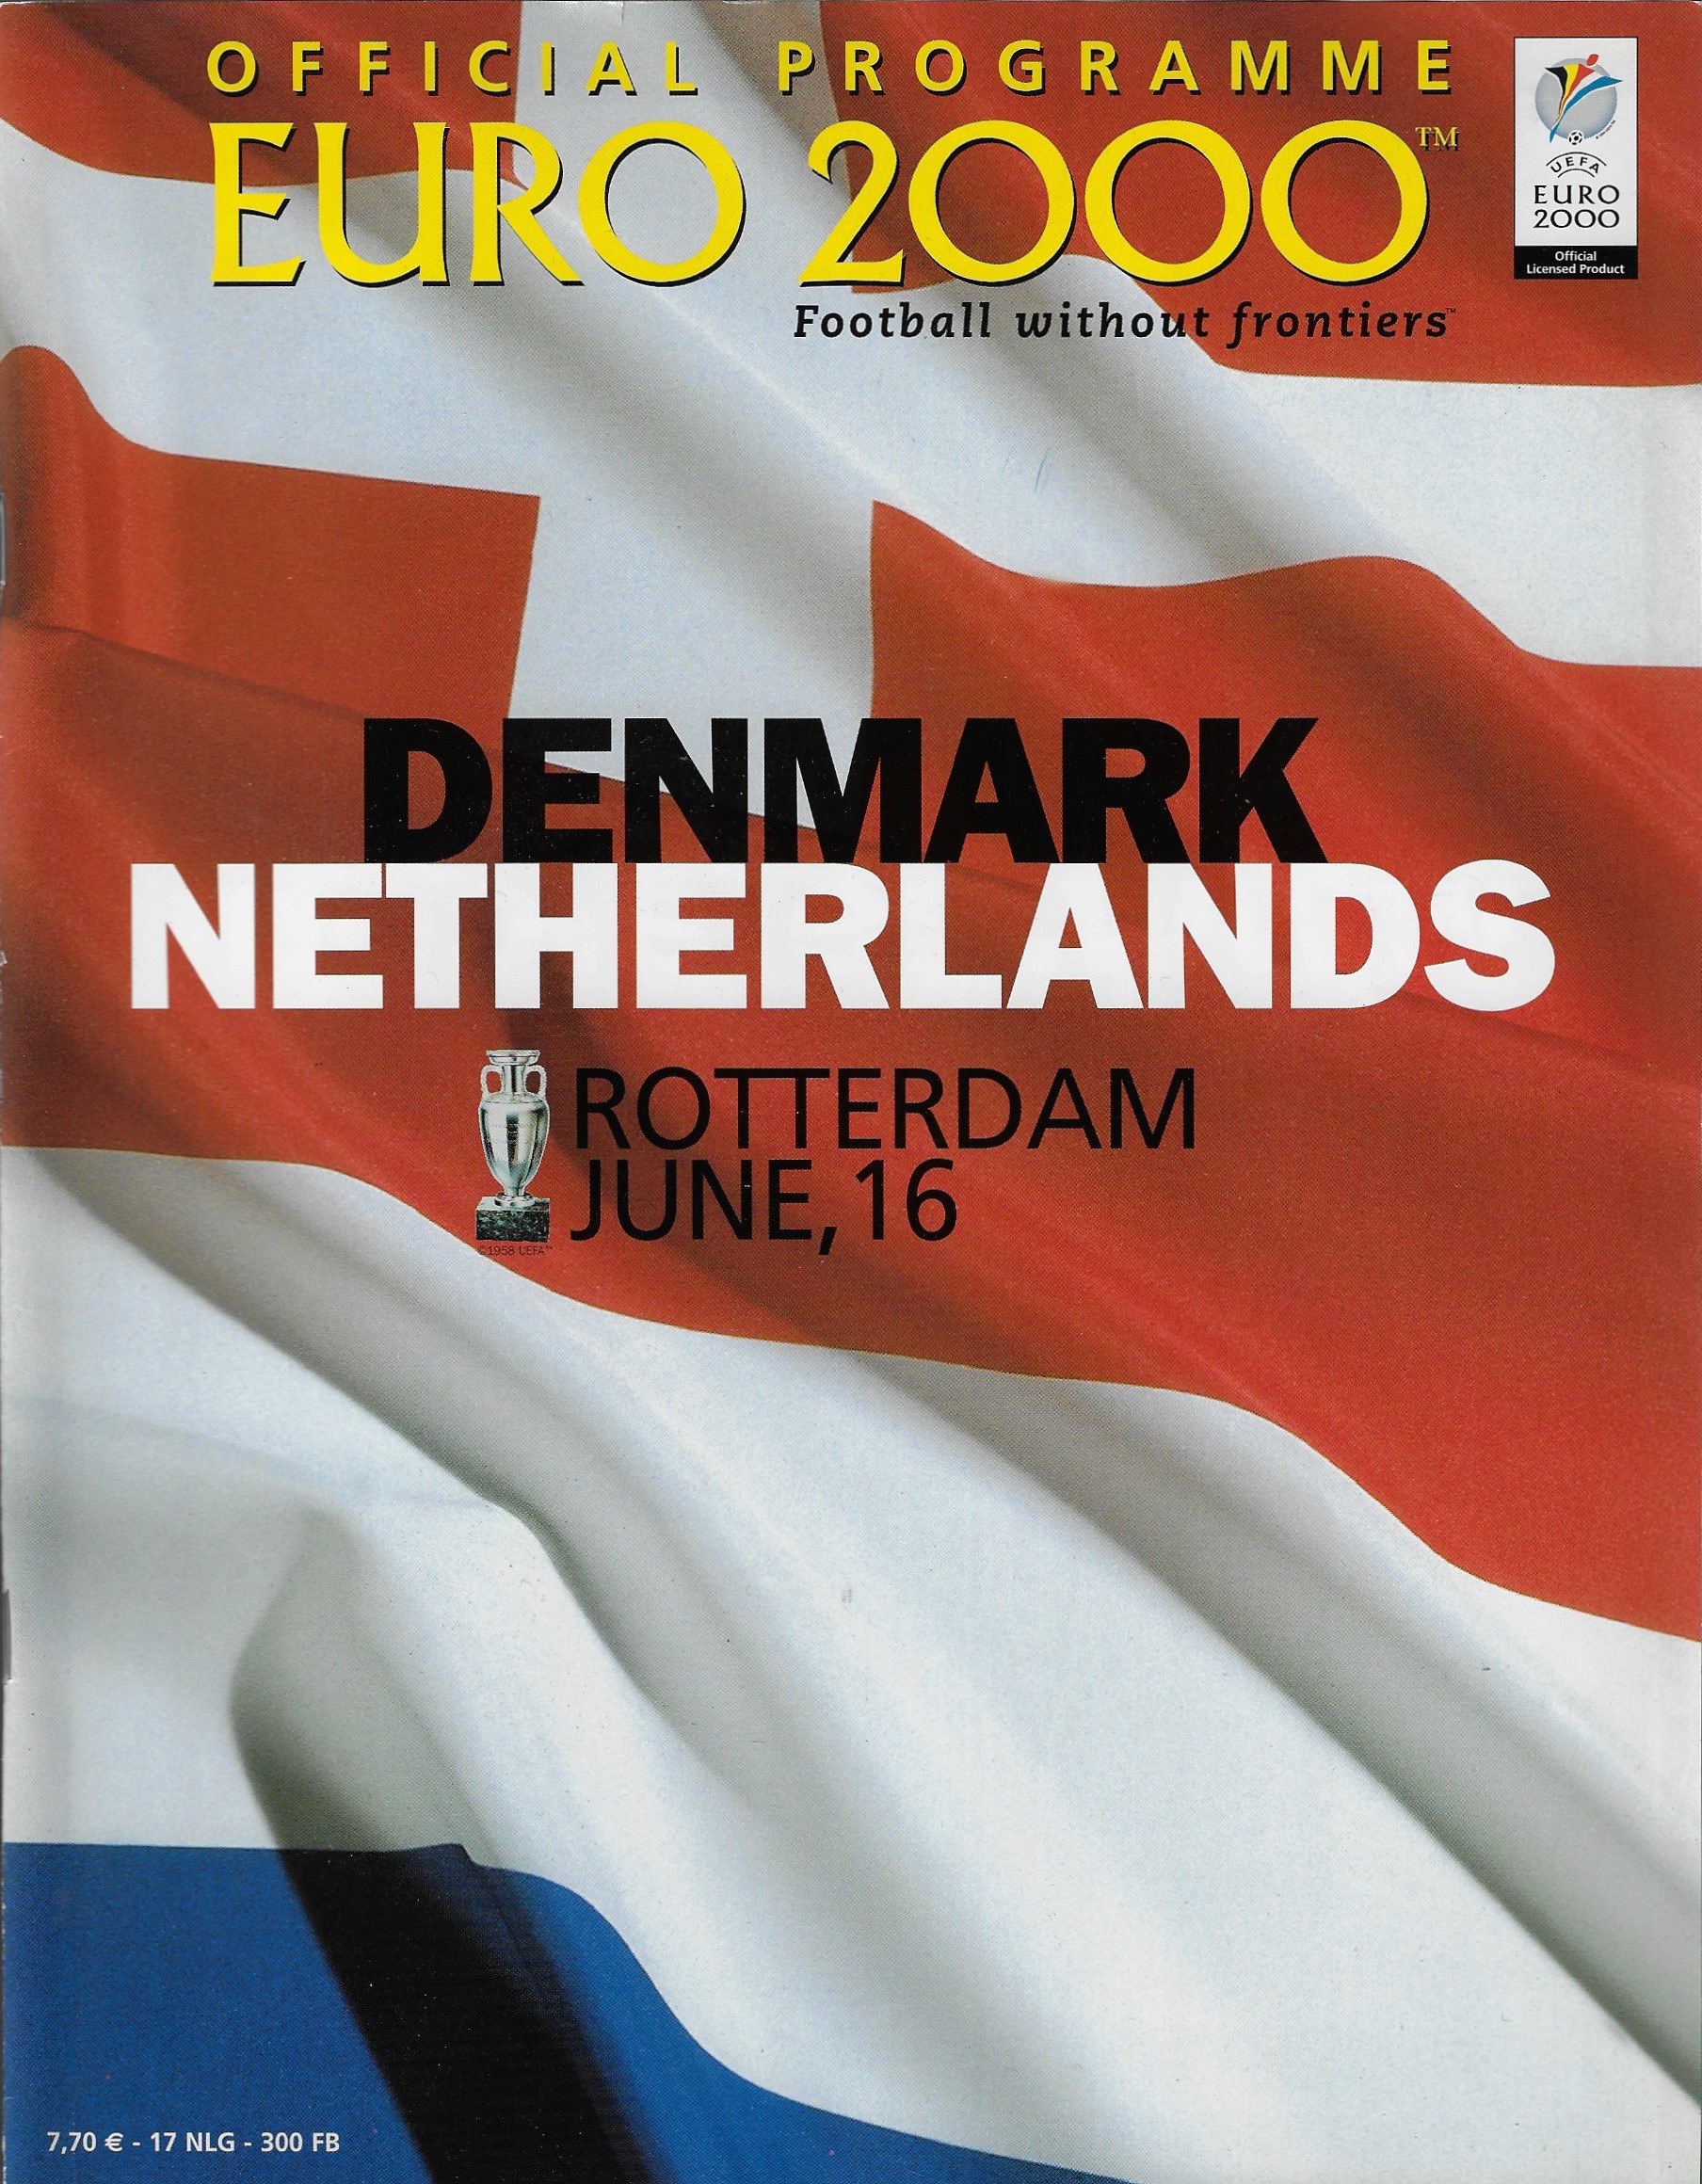  - Official Programme Euro 2000 Denmark Netherlands Rotterdam june, 16 -Football without frontiers